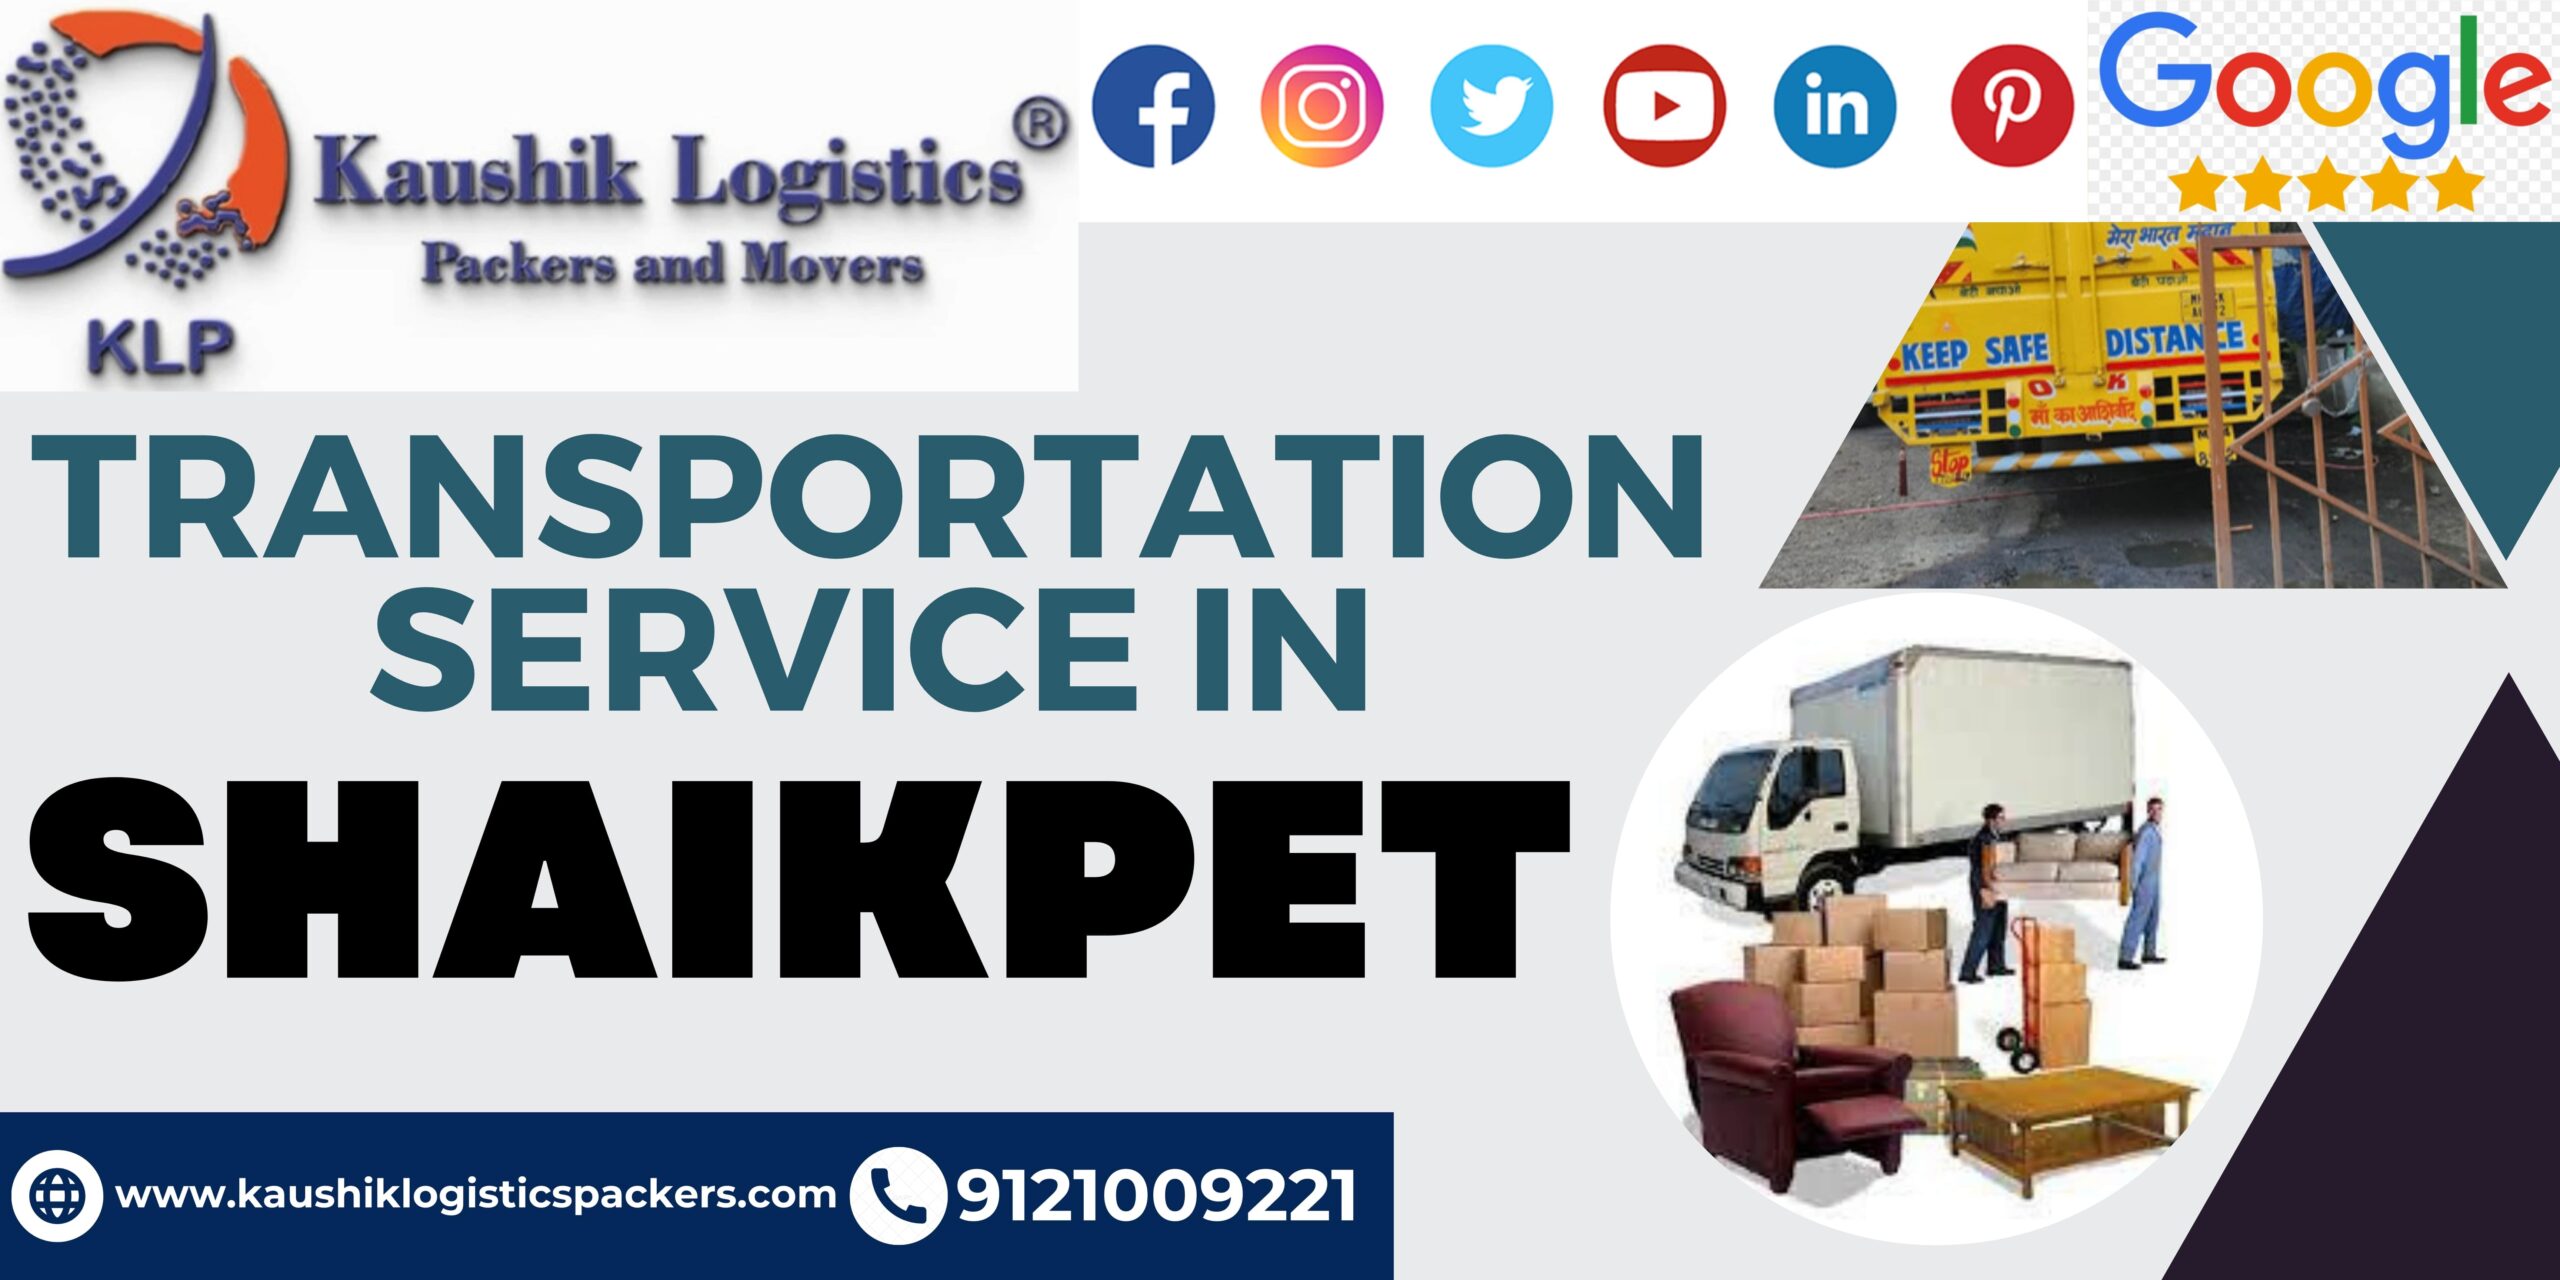 Packers and Movers In Shaikpet